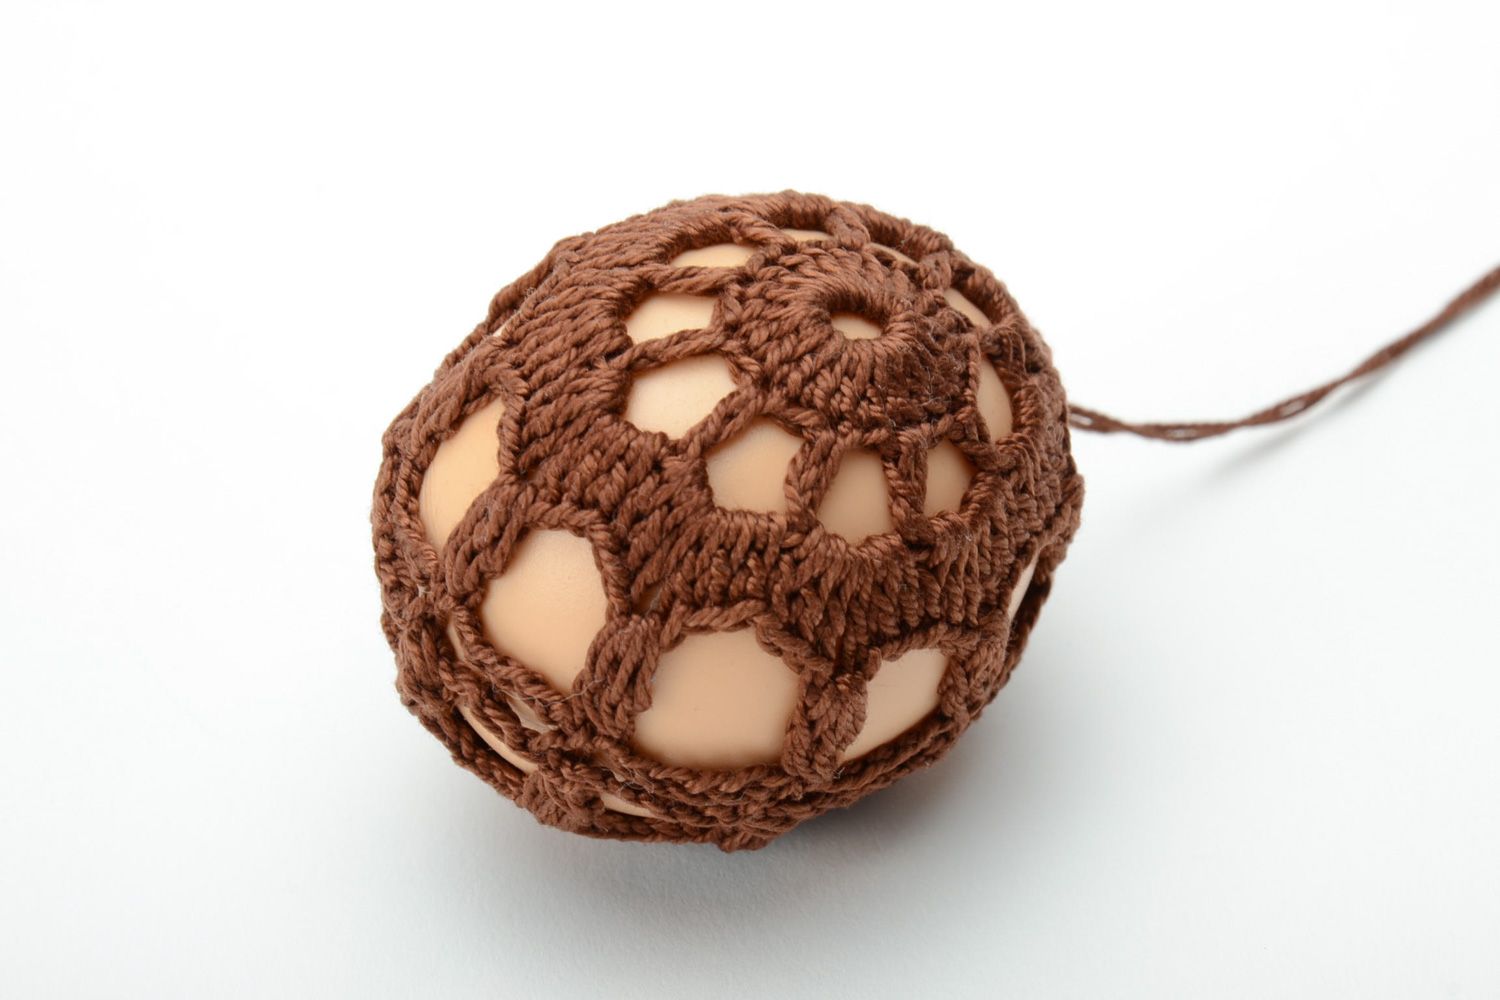 Handmade brown Easter egg woven over with cotton threads photo 2